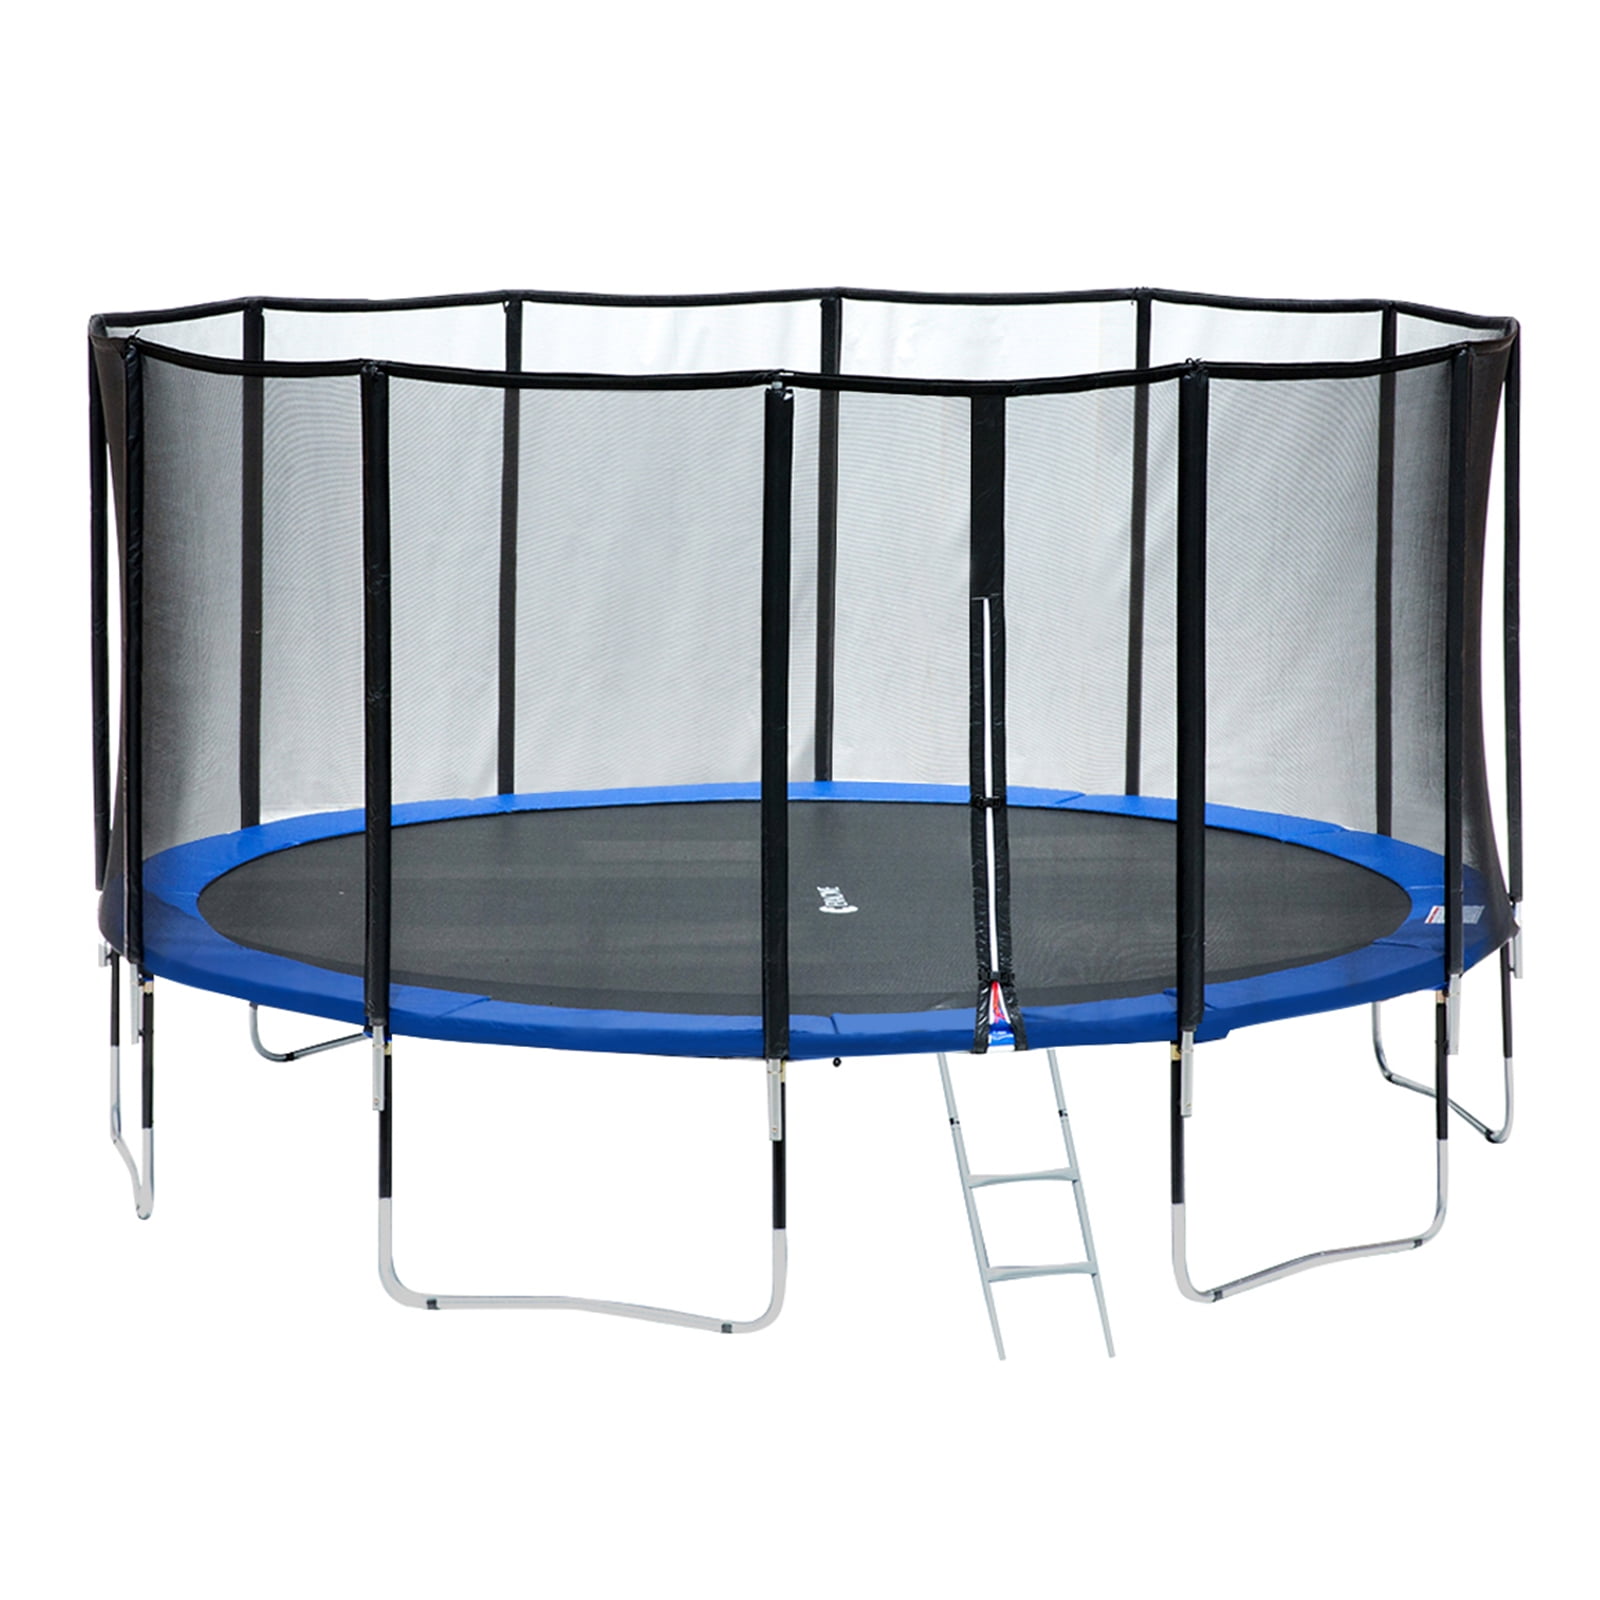 Exacme 15' Round Trampoline with Upgraded Carbon Fiber Support Pole